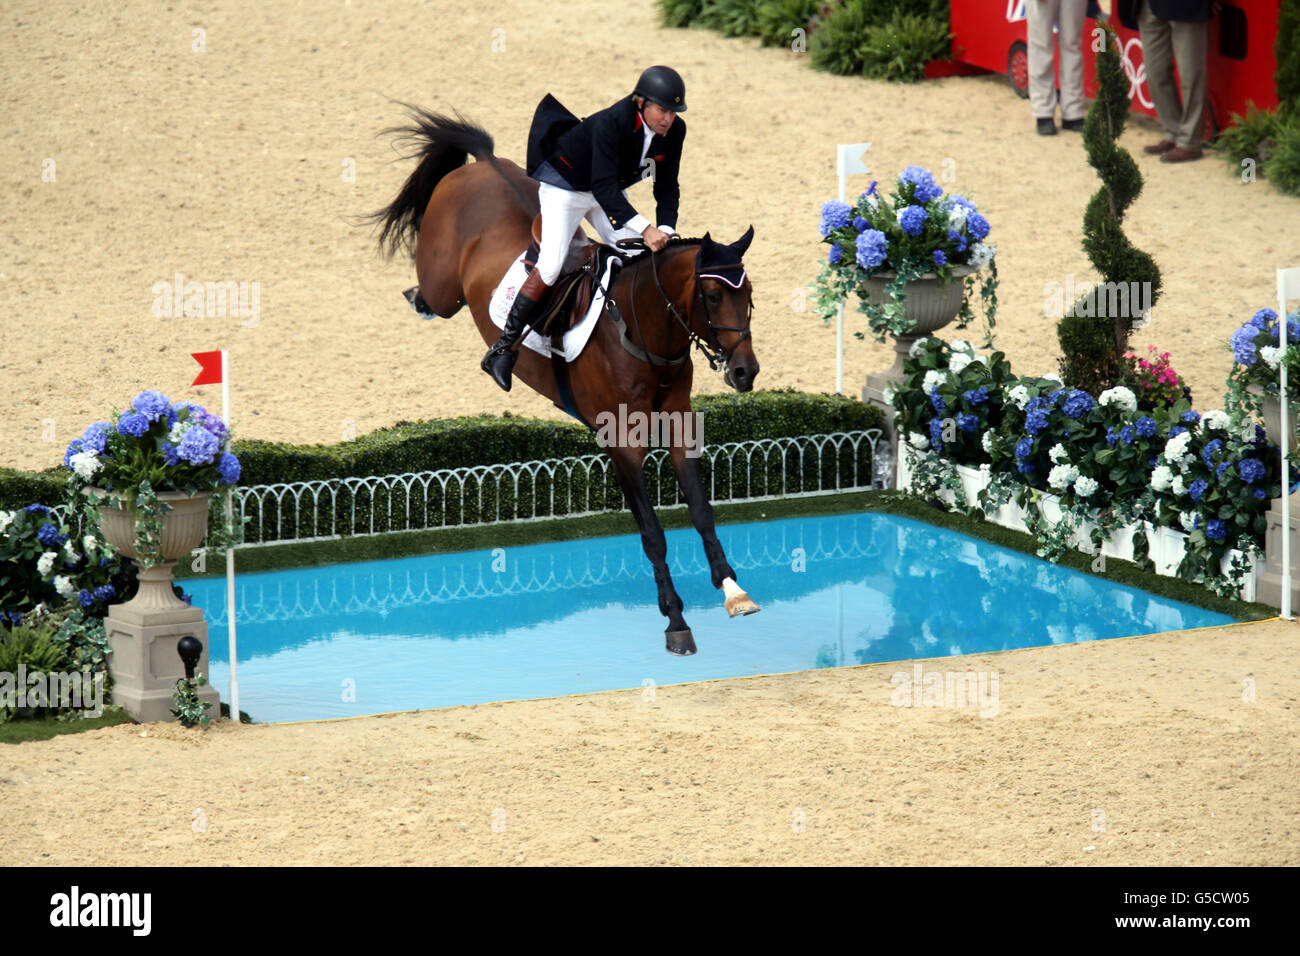 Great Britain's Nick Skelton riding Big Star during the Individual Jumping Final Round A at Greenwich Park,, on the twelfth day of the London 2012 Olympics. Stock Photo